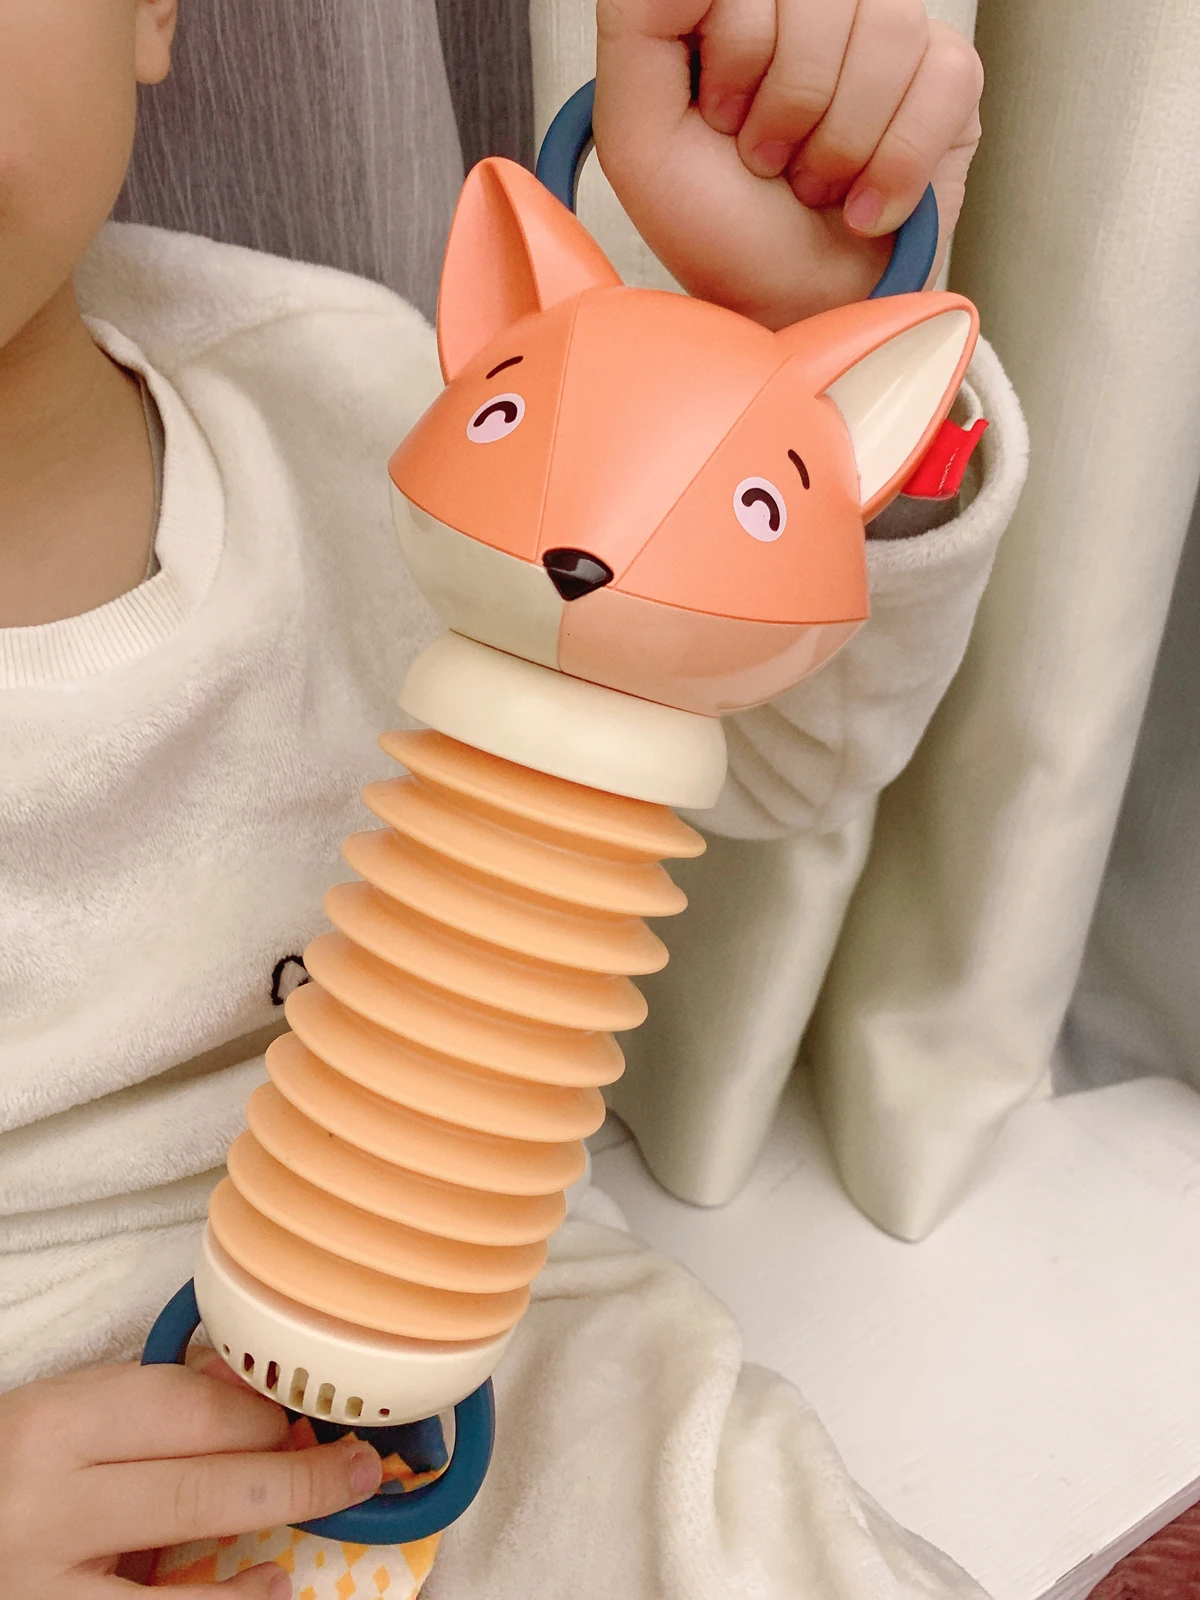 Fox Accordion Baby Toy Early Music Educational Accordion Toys